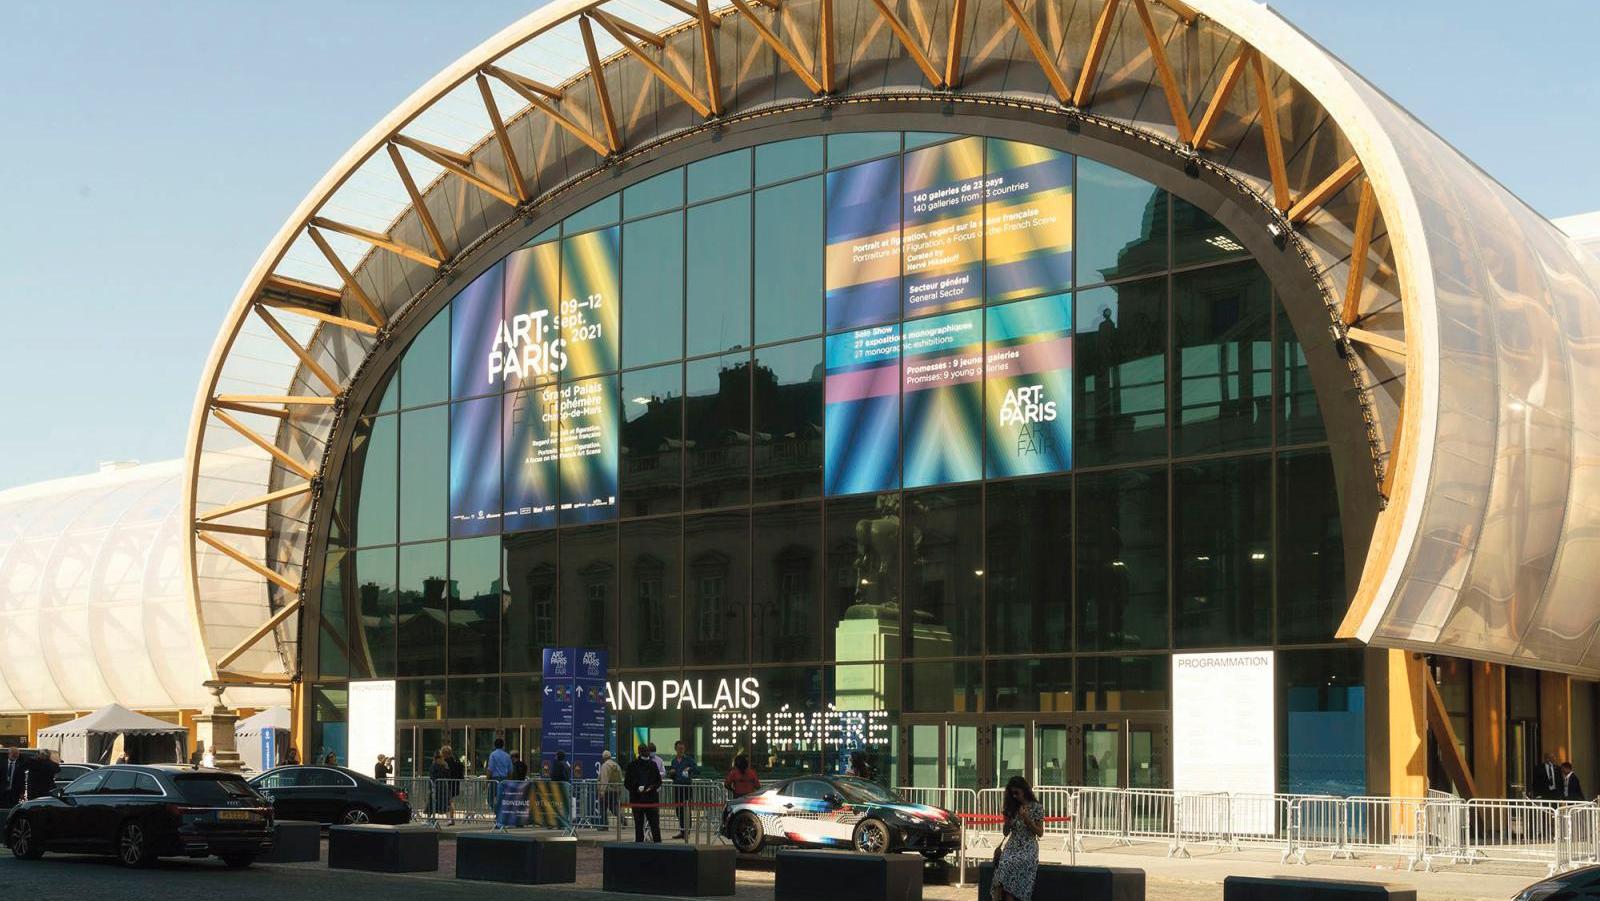 Art Paris, one of the few fairs to have been staged in 2021, is scheduled this year for early April.